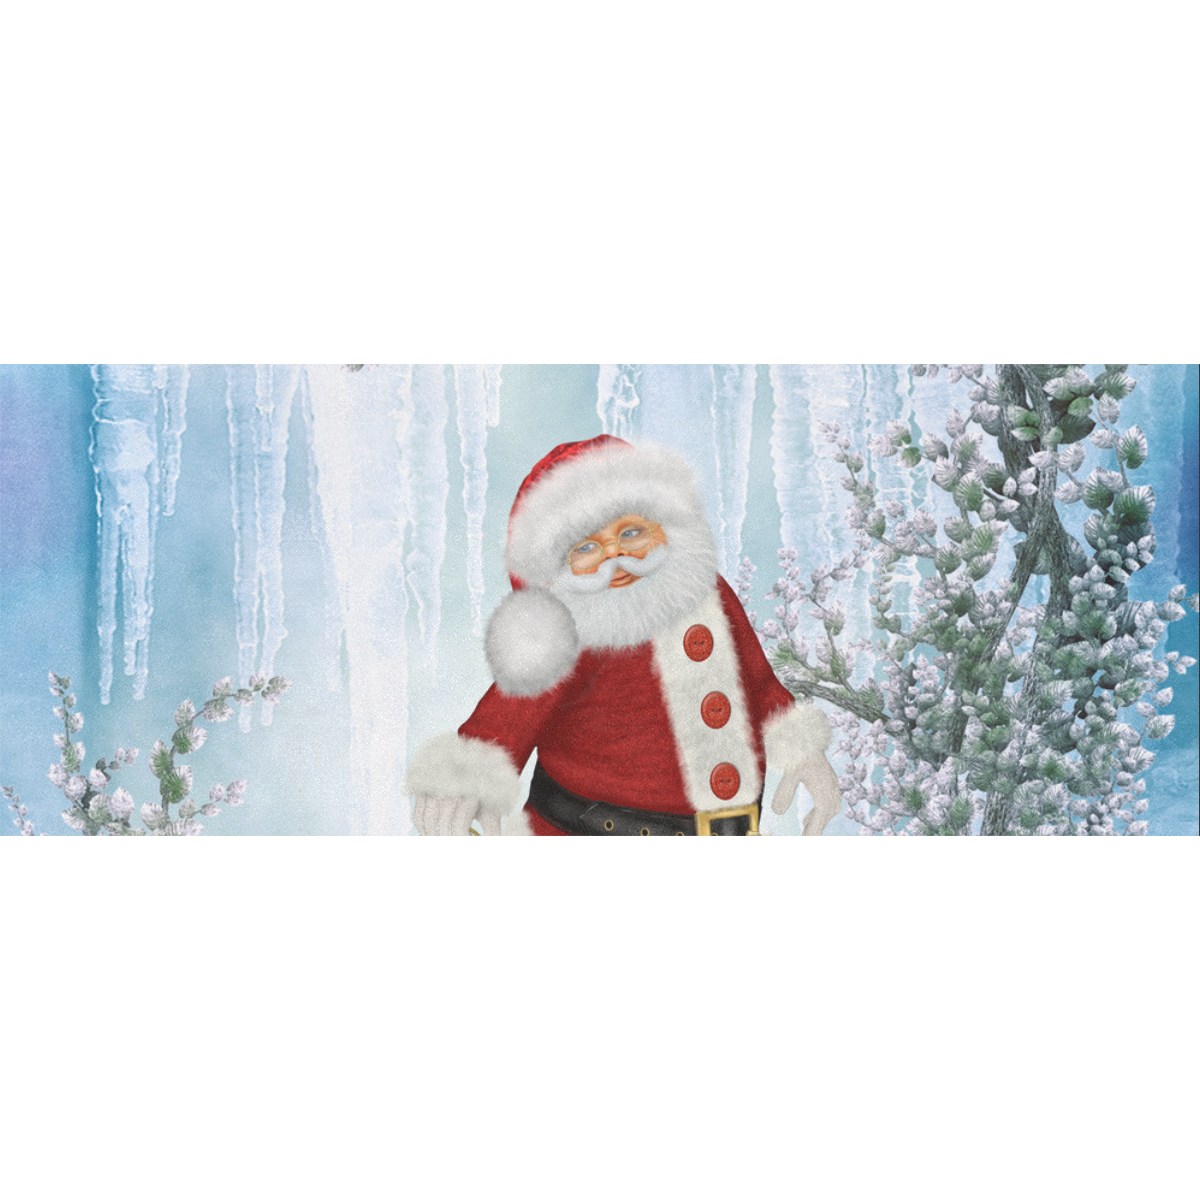 Santa Claus with penguin Gift Wrapping Paper 58"x 23" (5 Rolls)